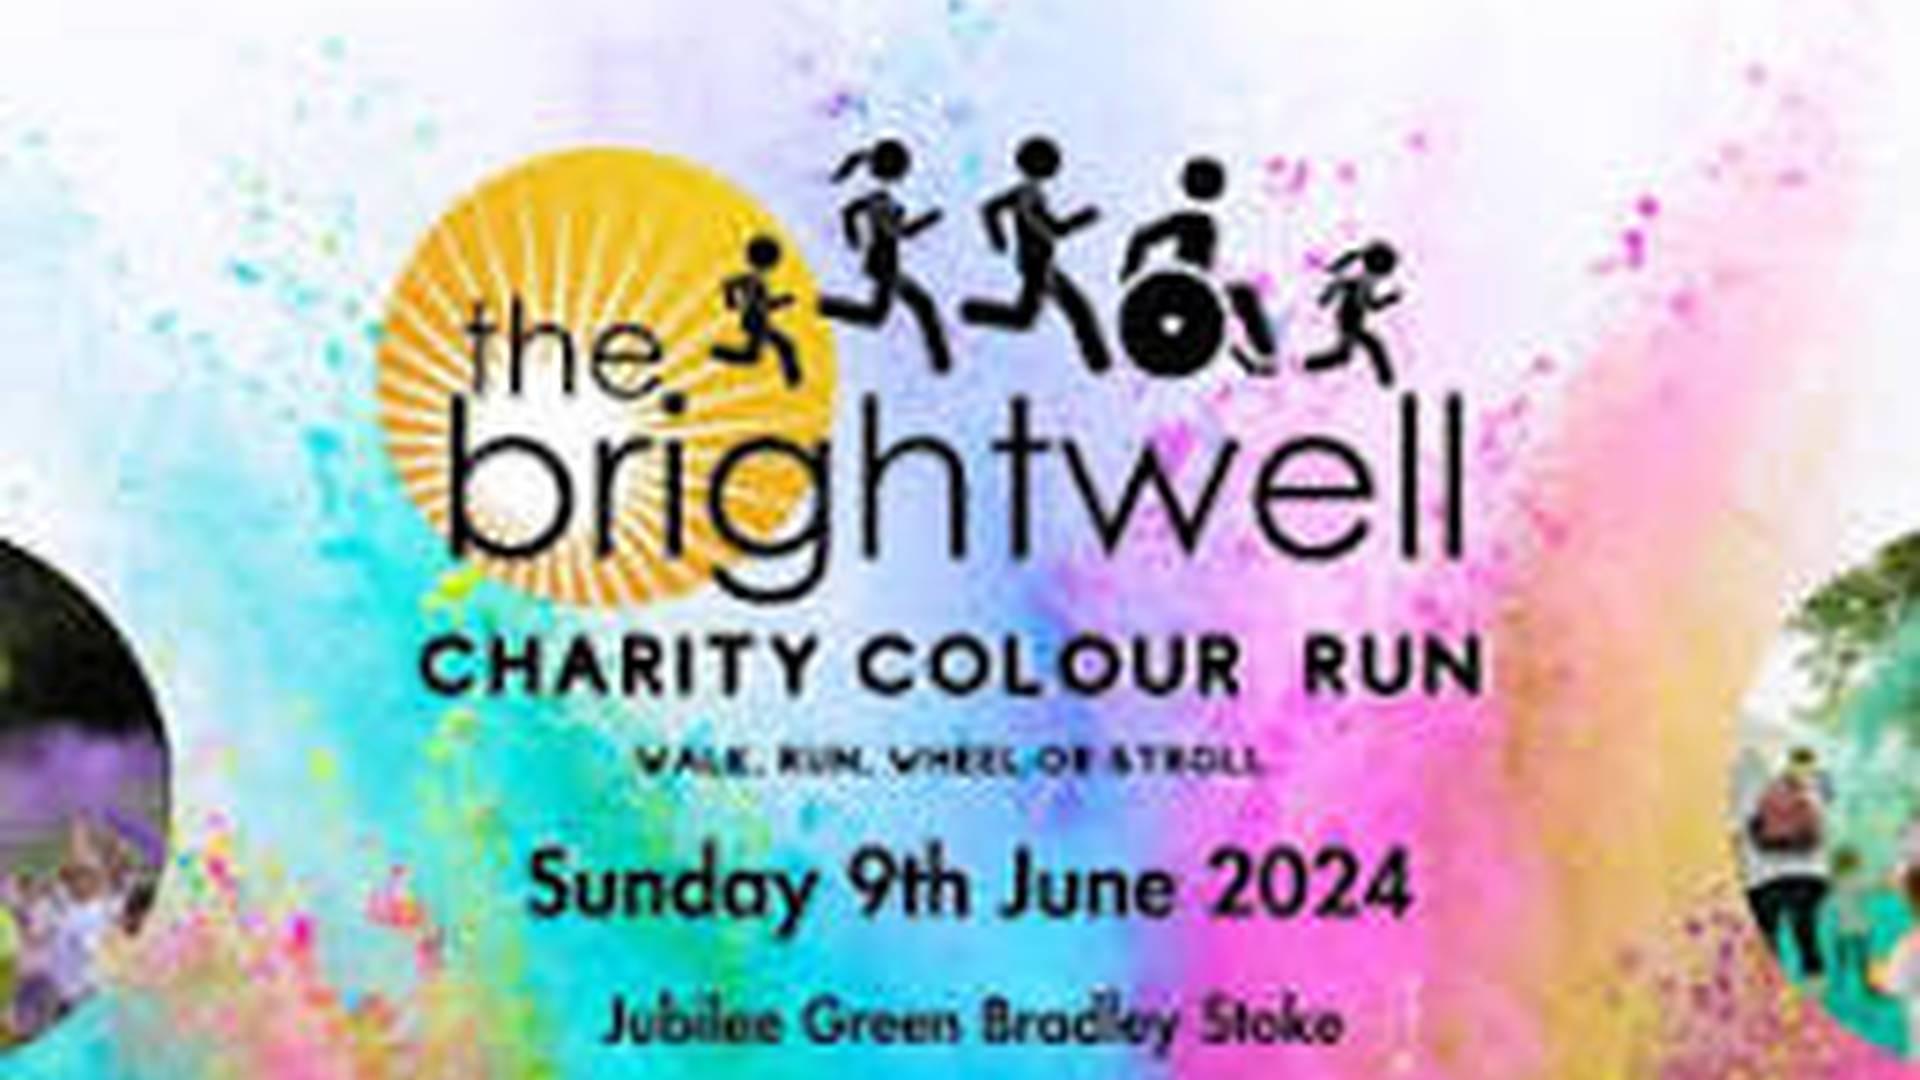 Charity Colour Run at The Brightwell photo